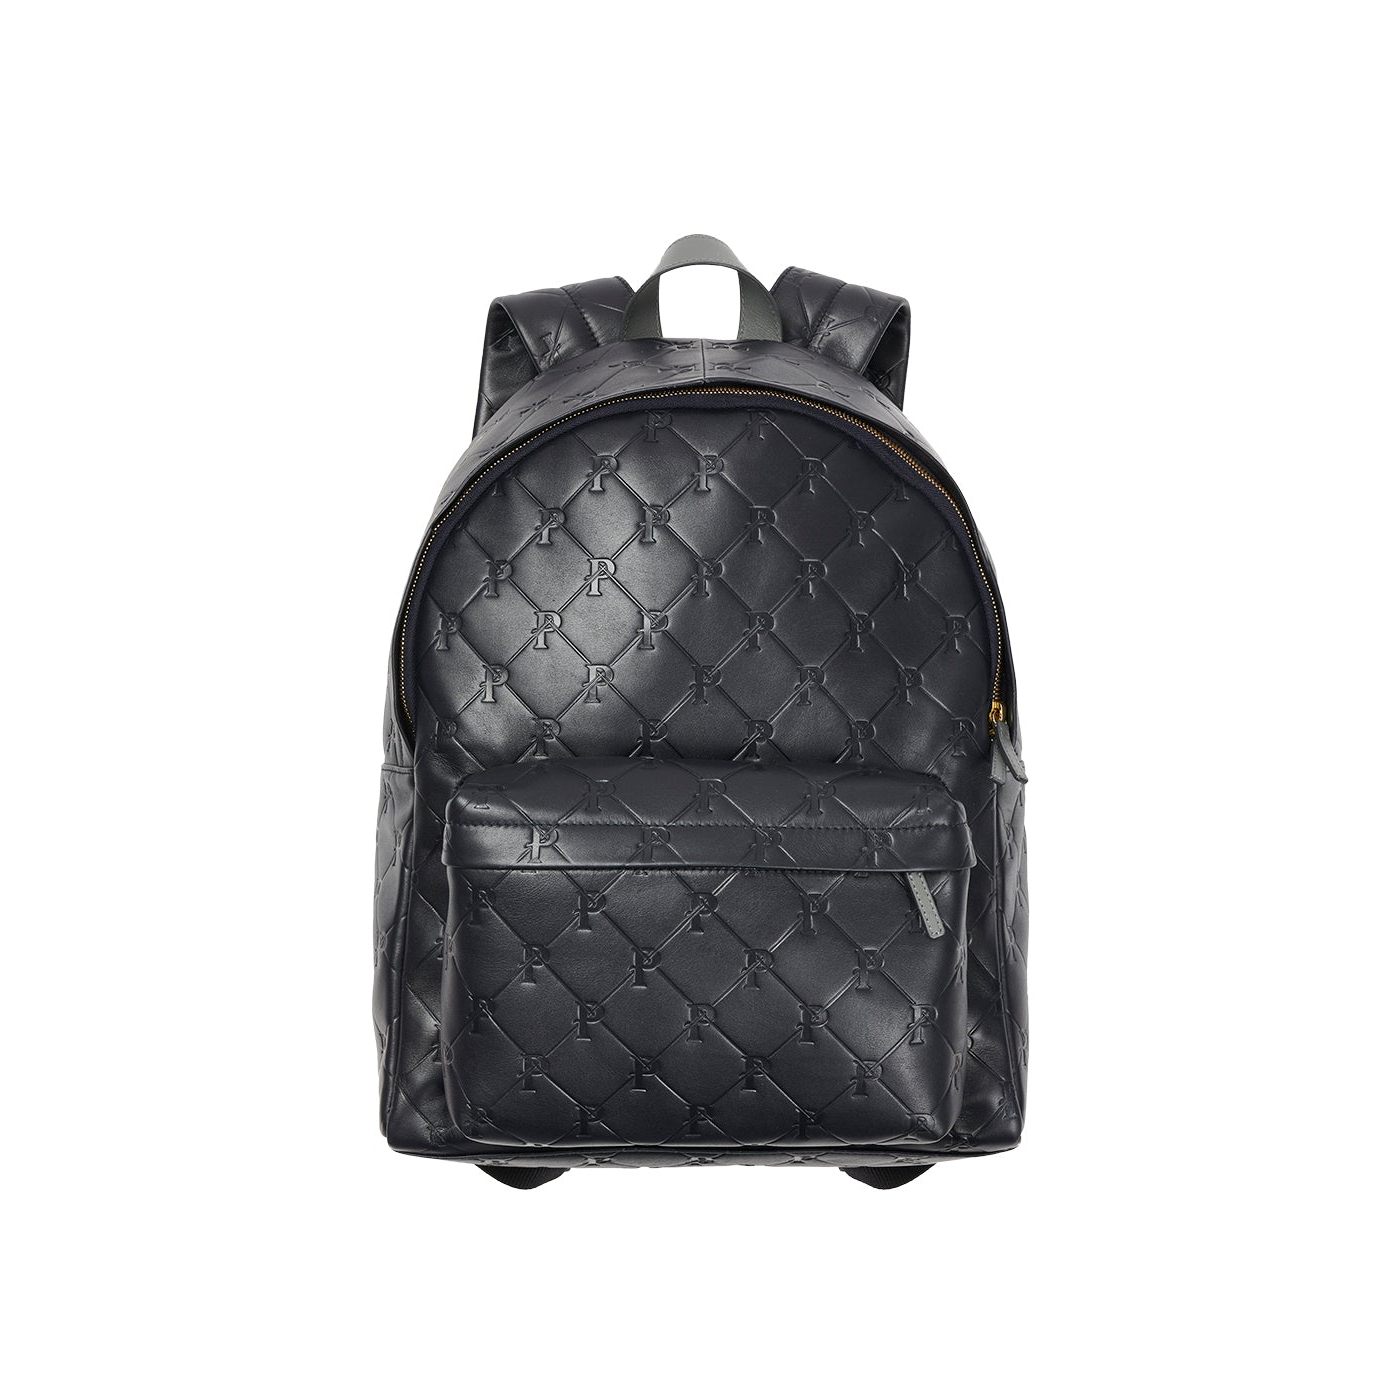 Thumbnail PAL-M-GRAM LEATHER BACKPACK MIDNIGHT BLUE one color